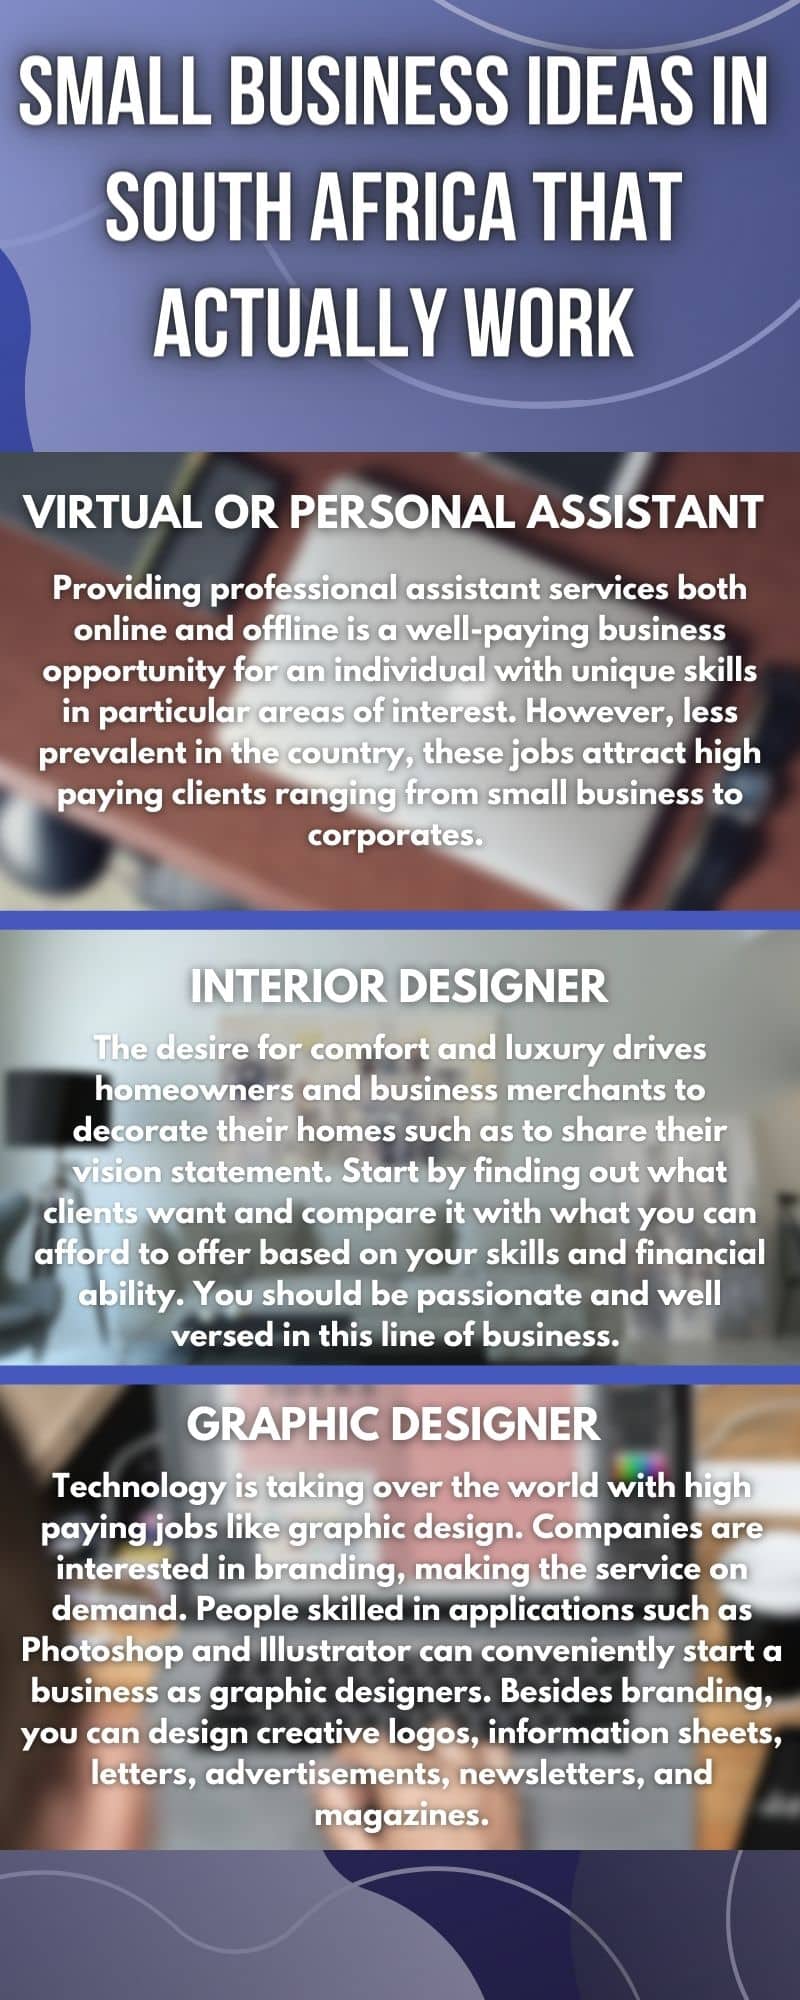 small business ideas in South Africa